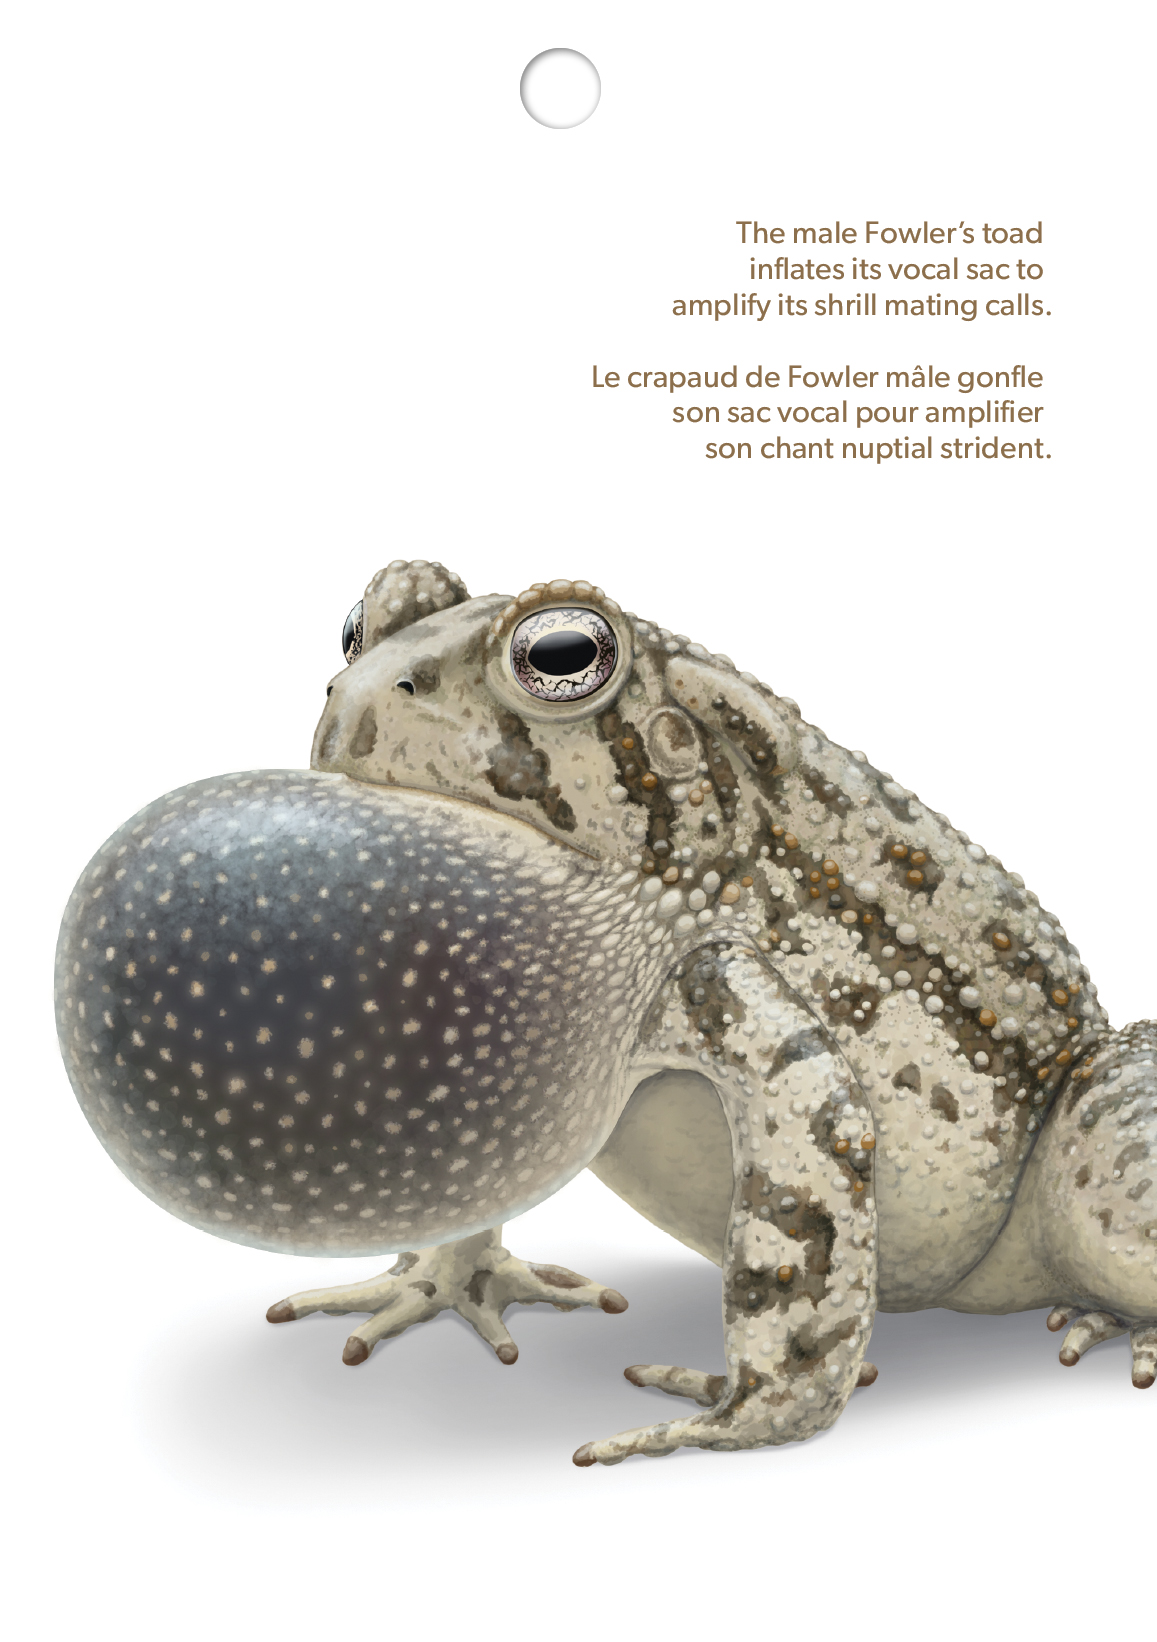 Stamp booklet cover flap featuring illustration of Fowler's toad with inflated throat